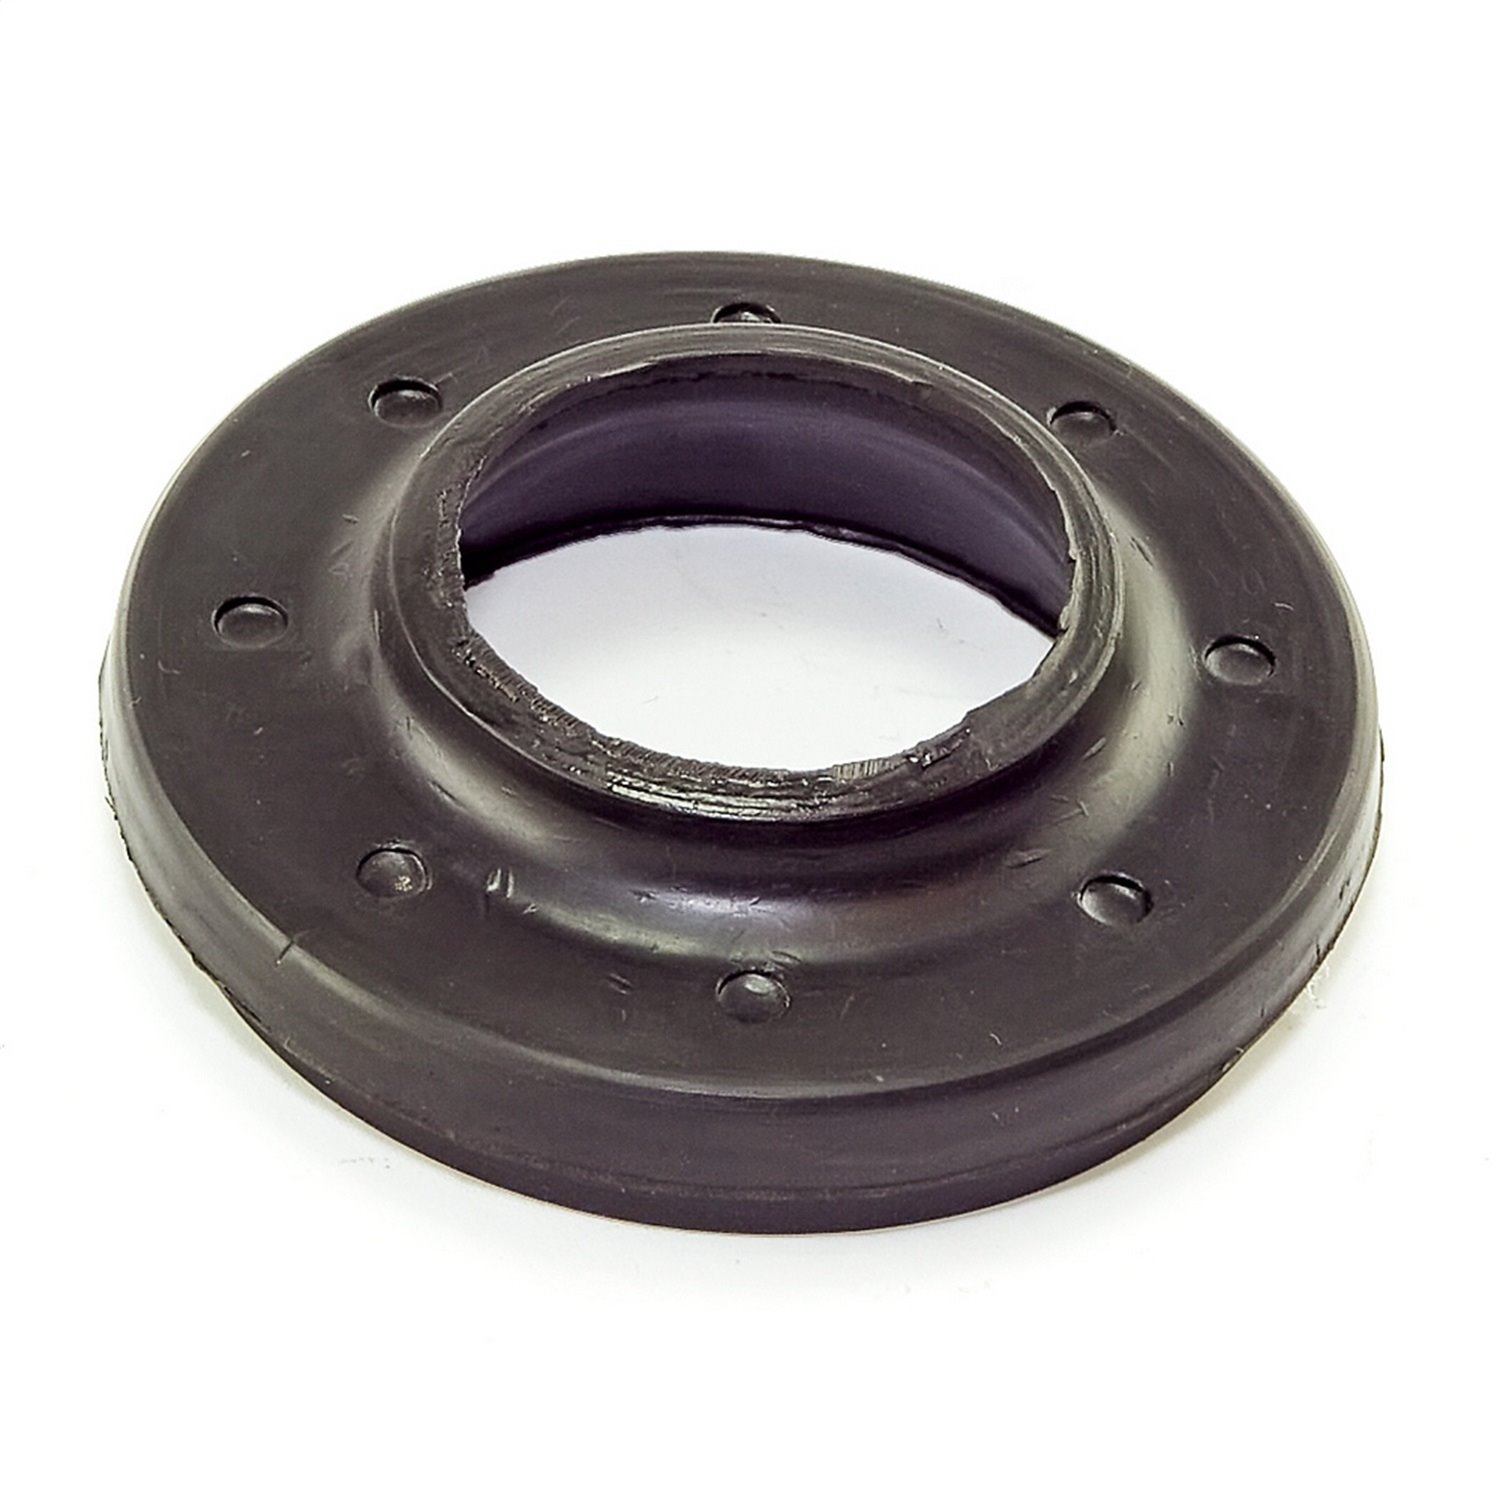 Stock replacement coil spring isolator from Omix-ADA, Fits 84-01 Jeep Cherokees.